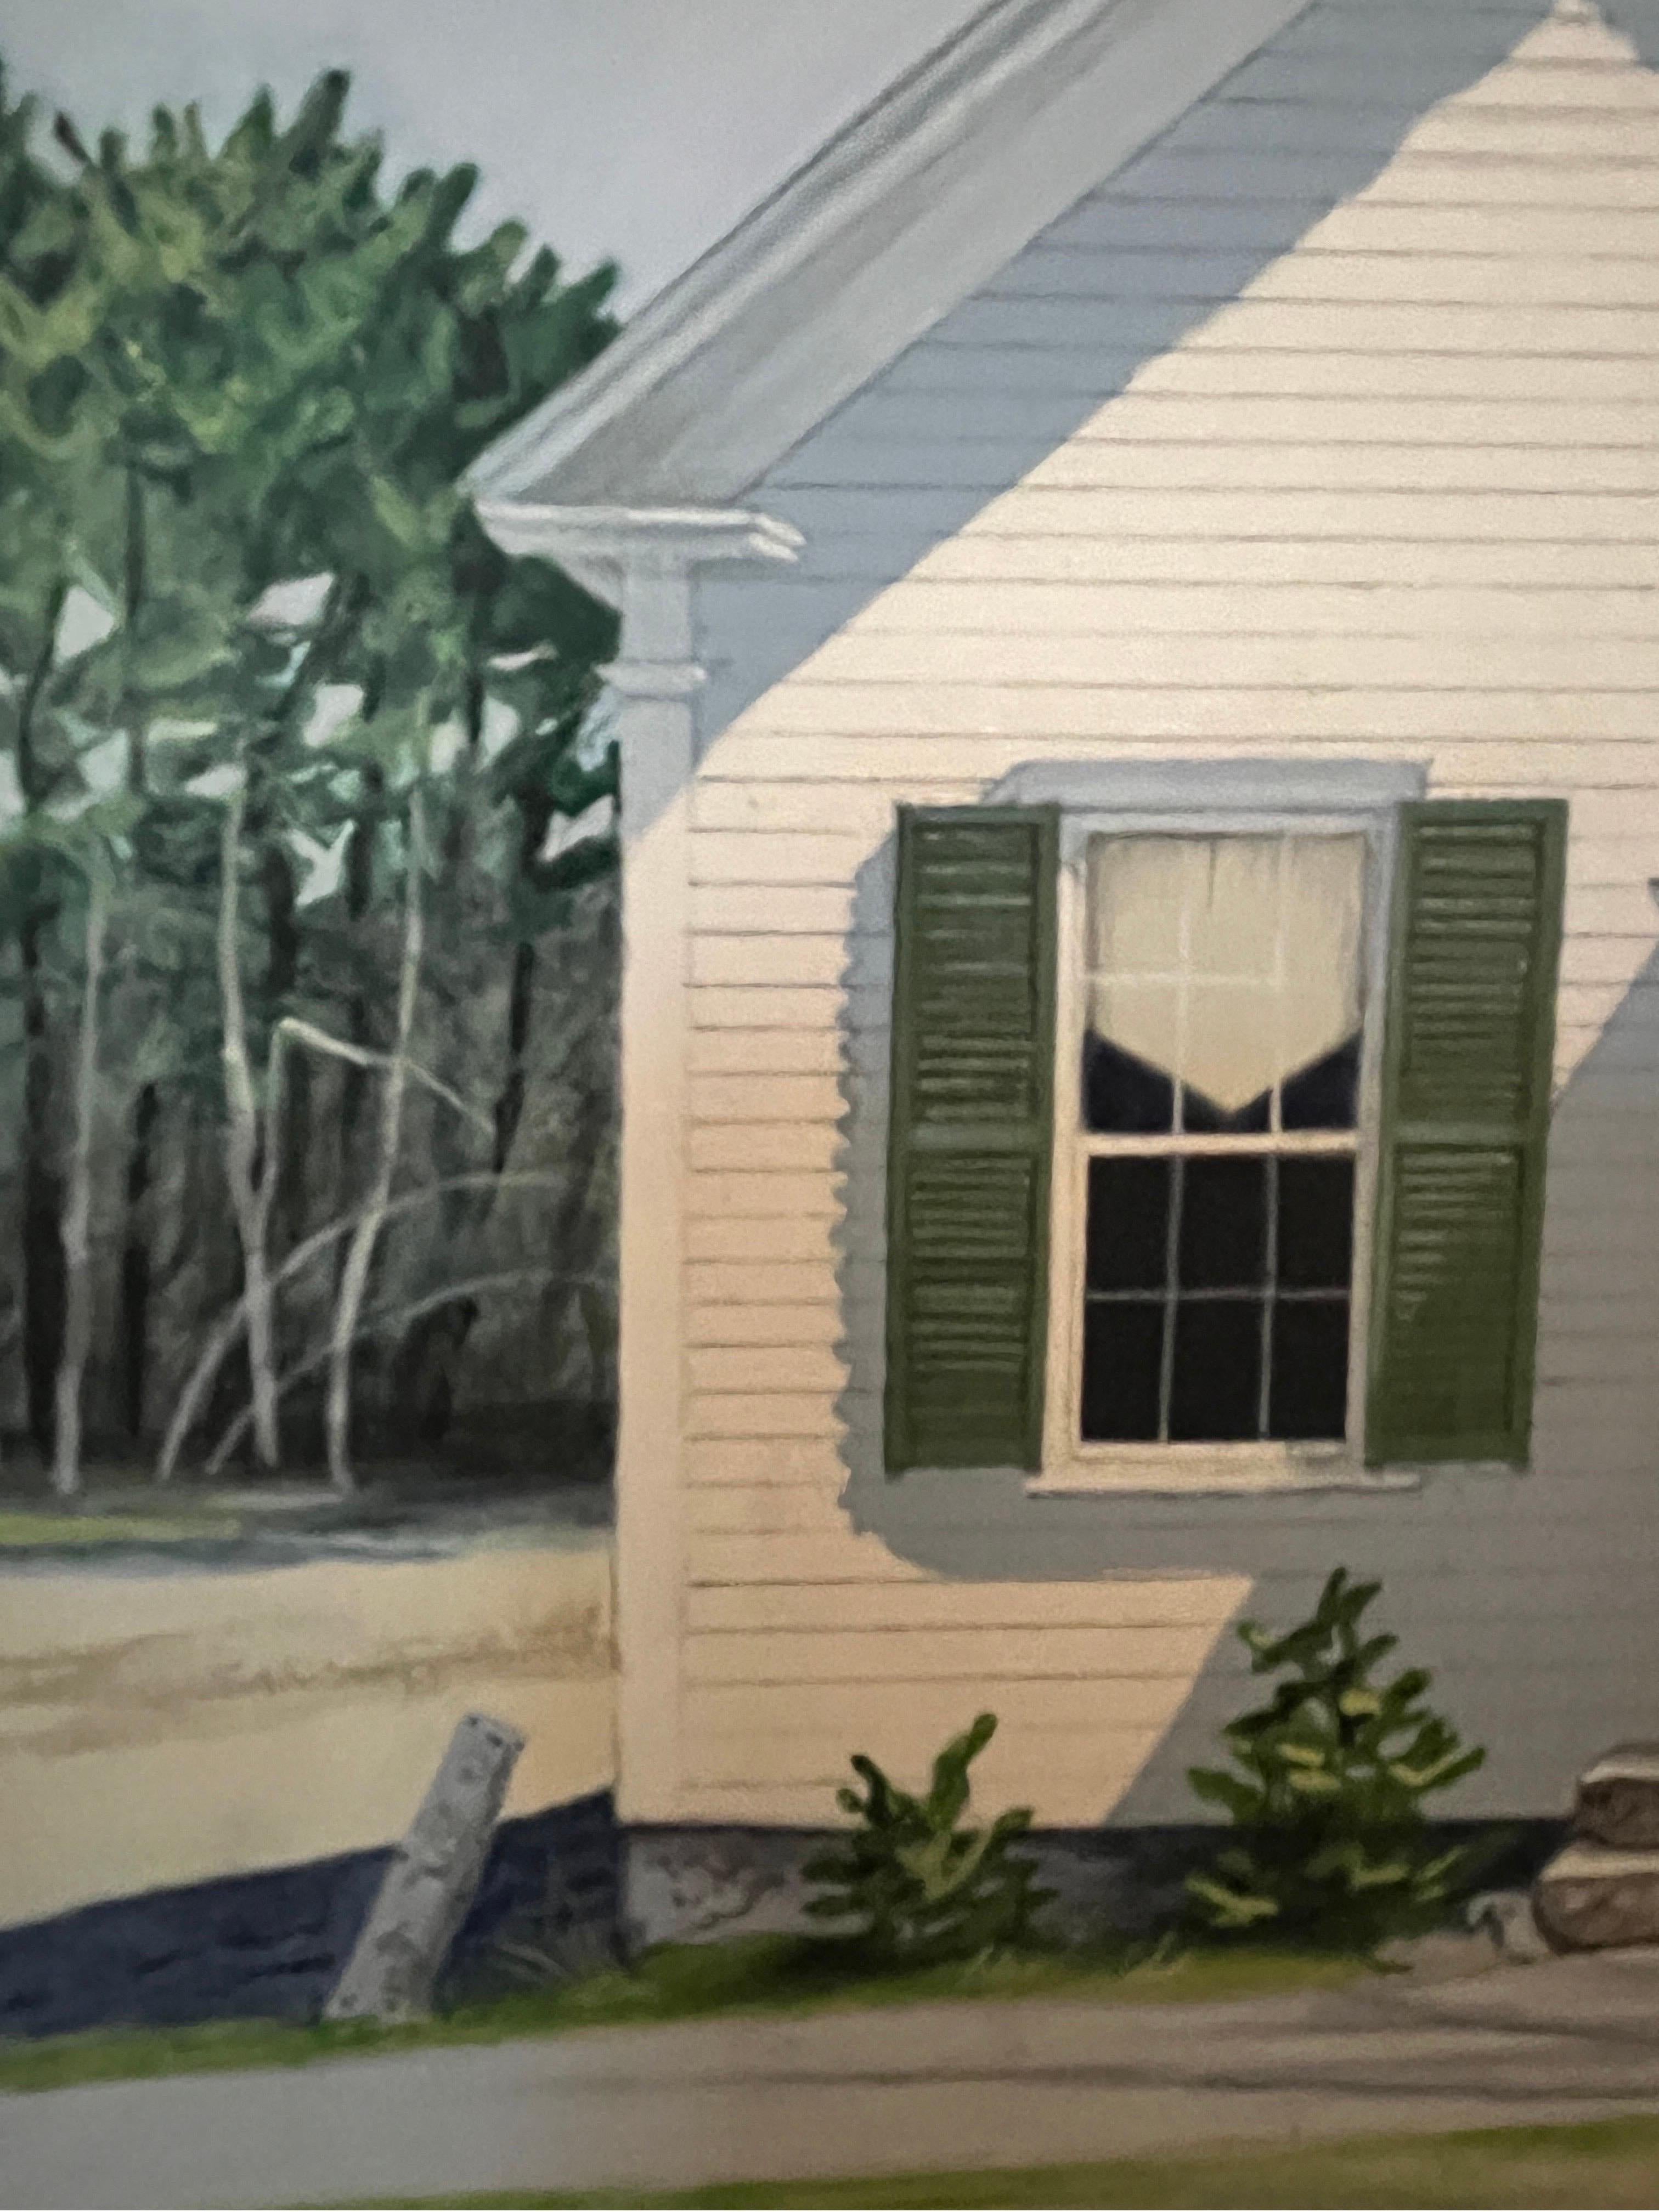 Linda Hefner is known for her vibrant acrylic paintings of historical New England barns and architecture. Hefner’s love of endangered Americana is rooted in the past, including her own: she spent formative years of her childhood among enduring